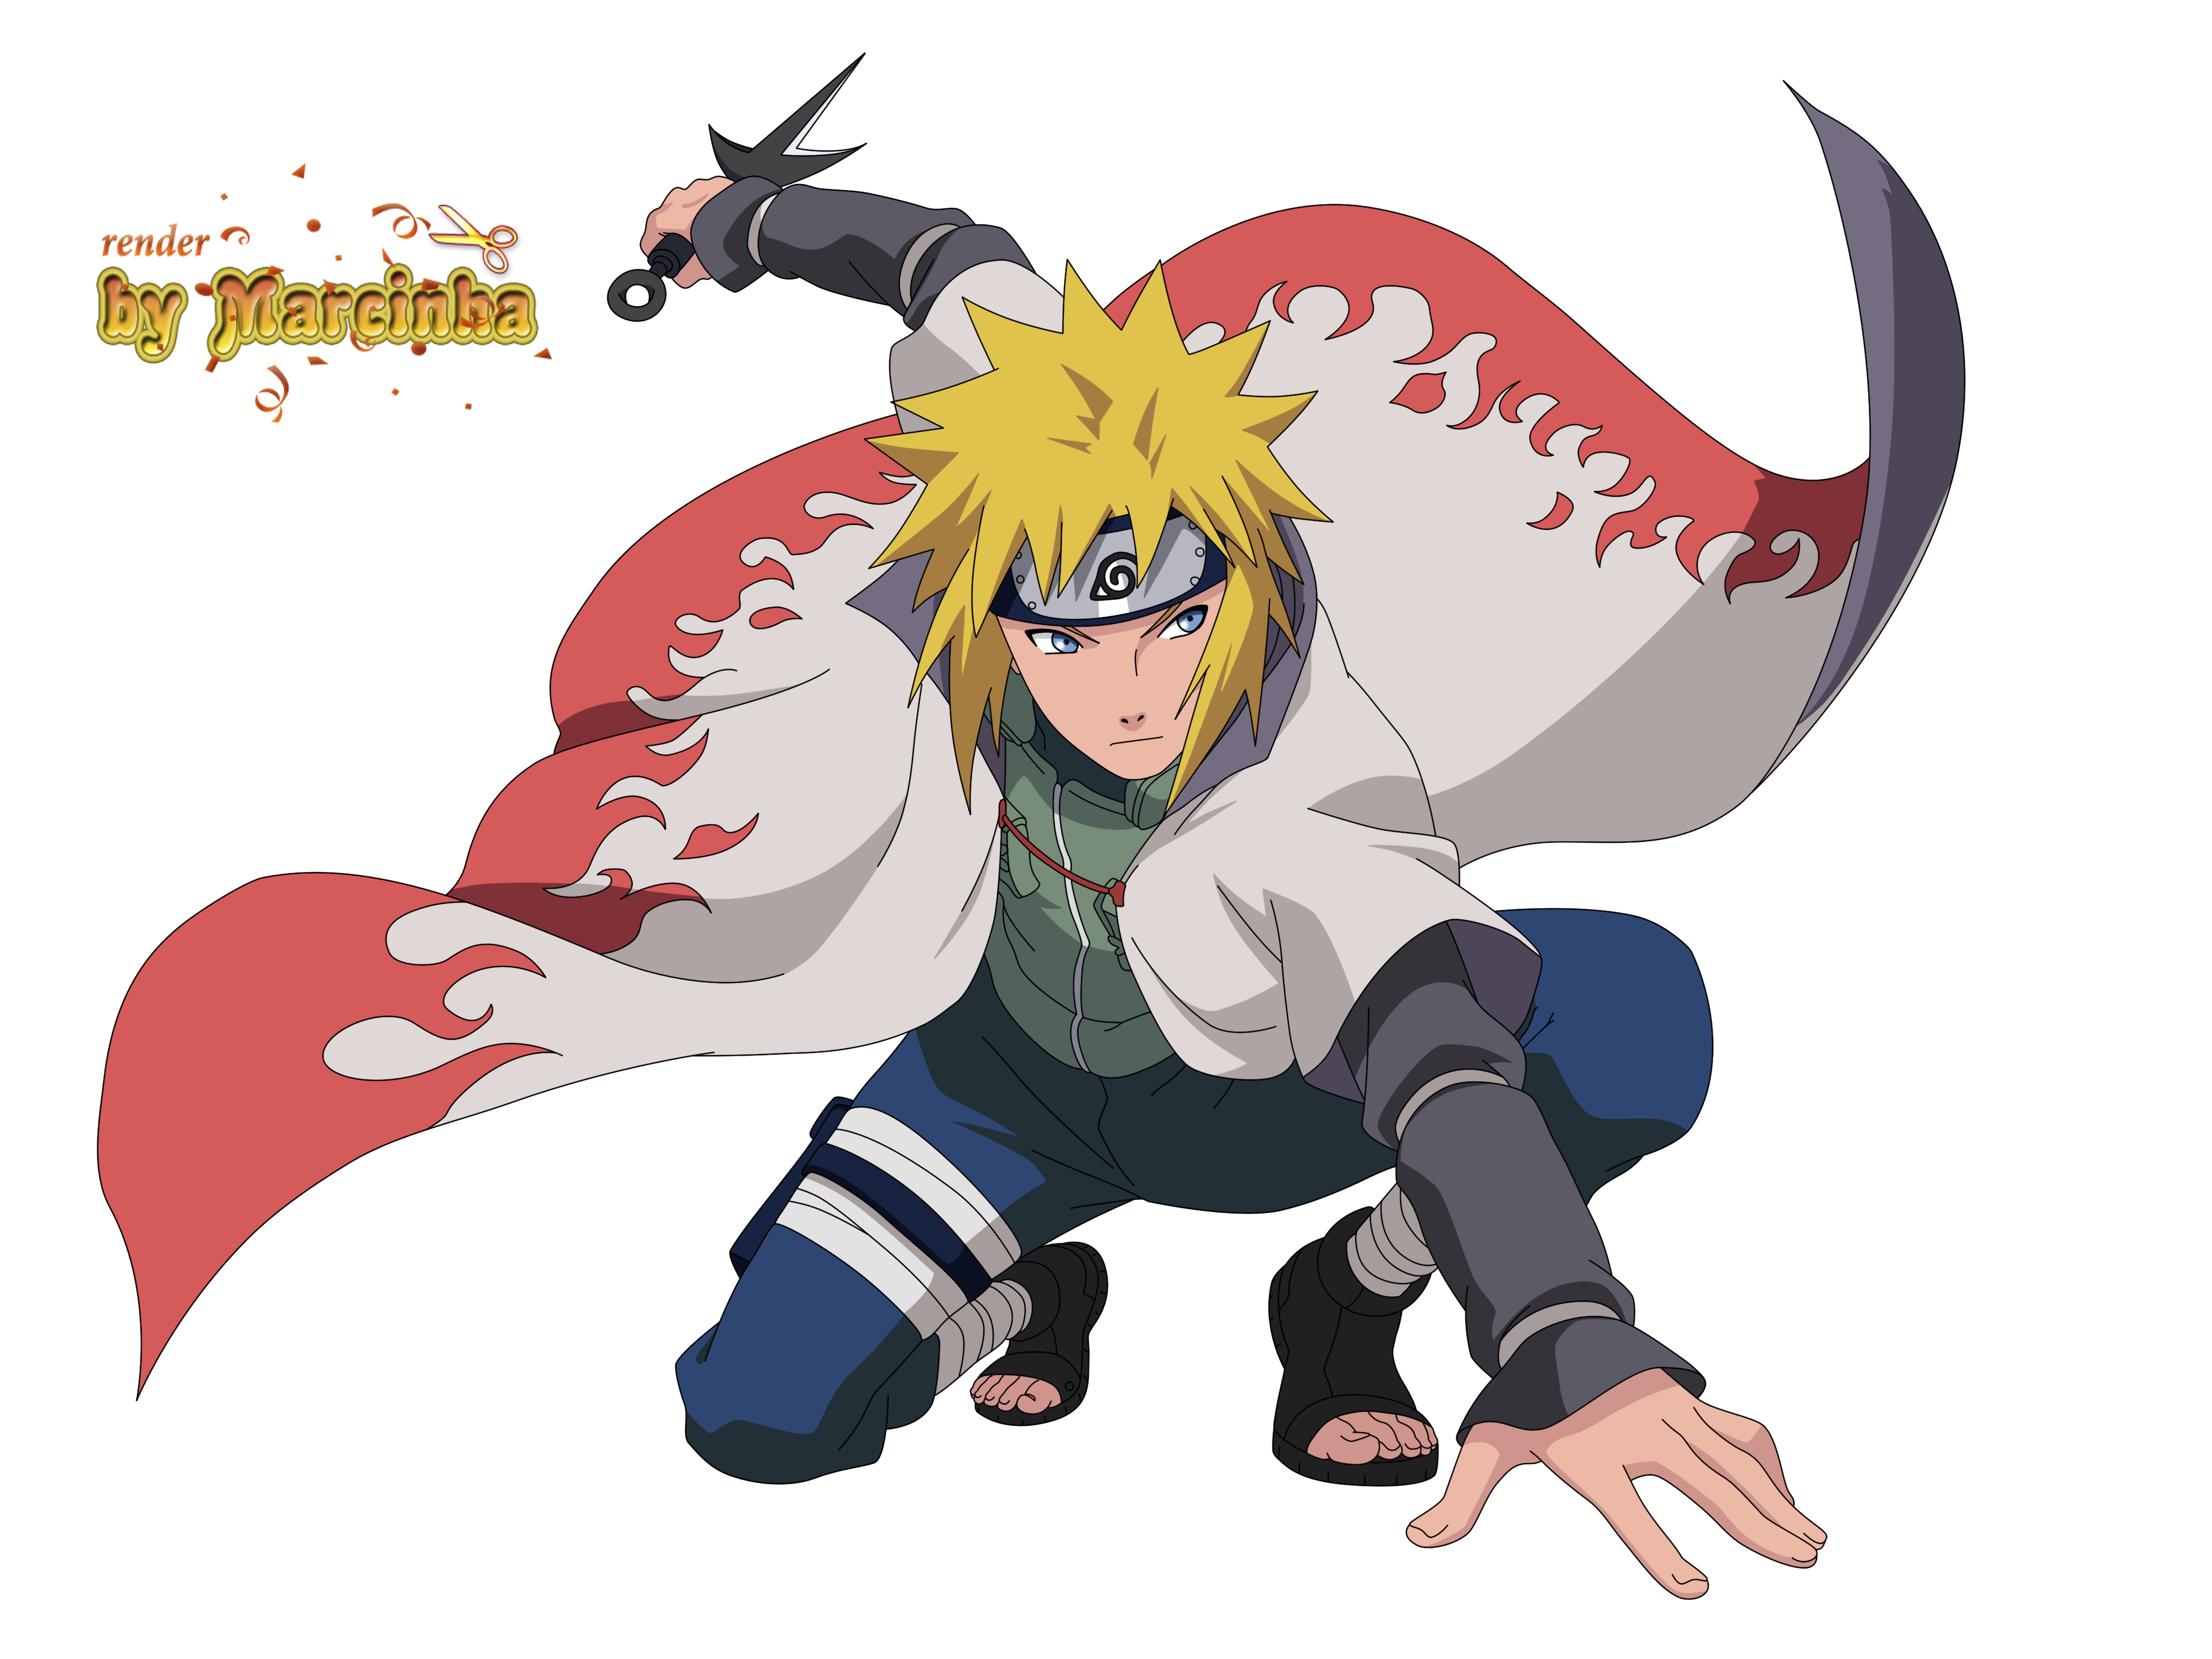 The Fourth Hokage by Cclaire110 on DeviantArt